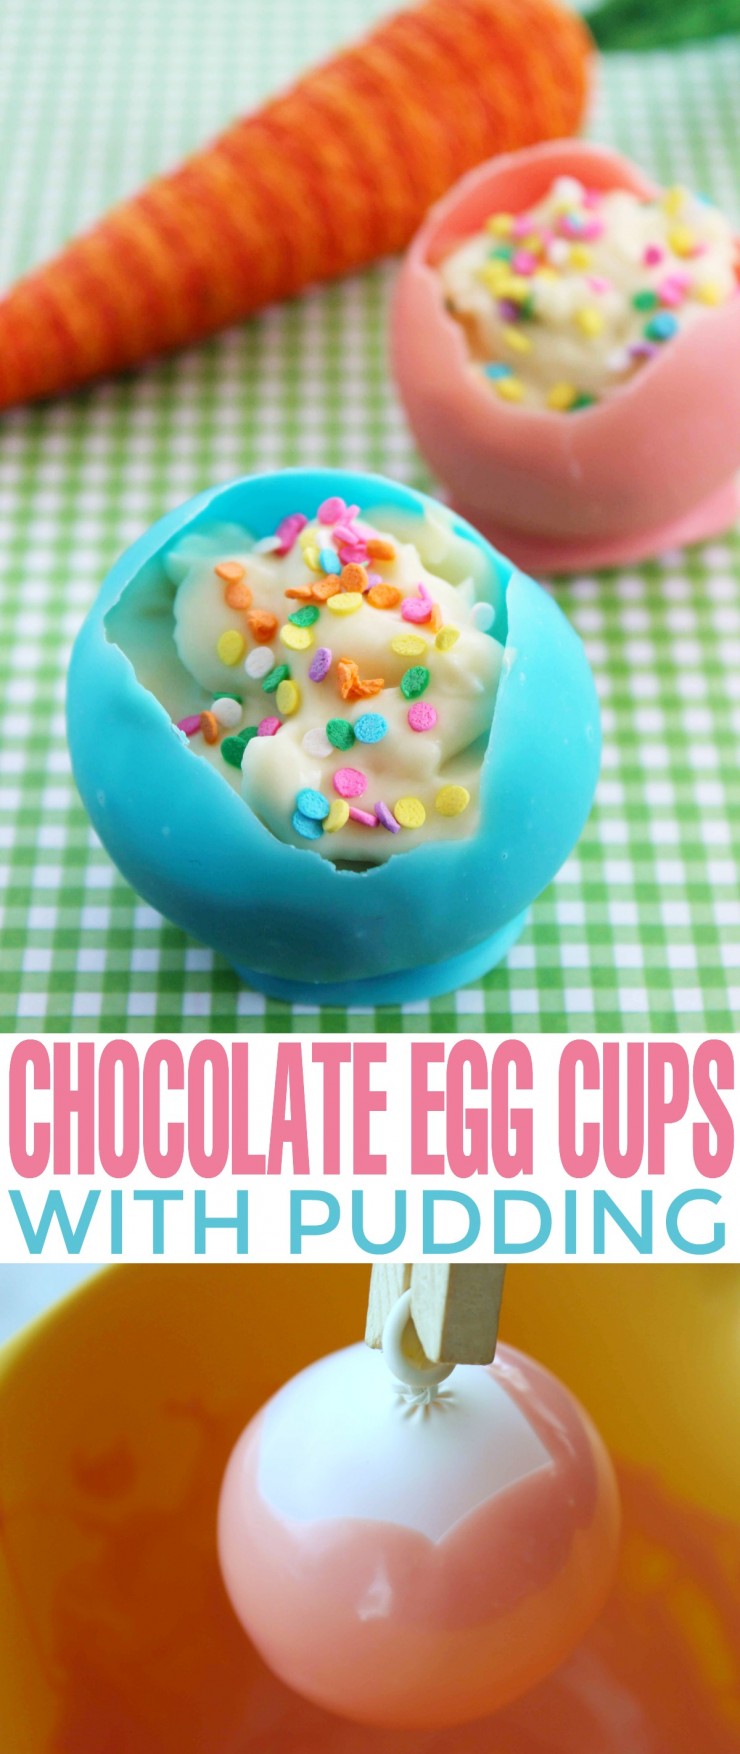 These Chocolate Egg Cups filled with Pudding are a fun Easter dessert that kids will just love!